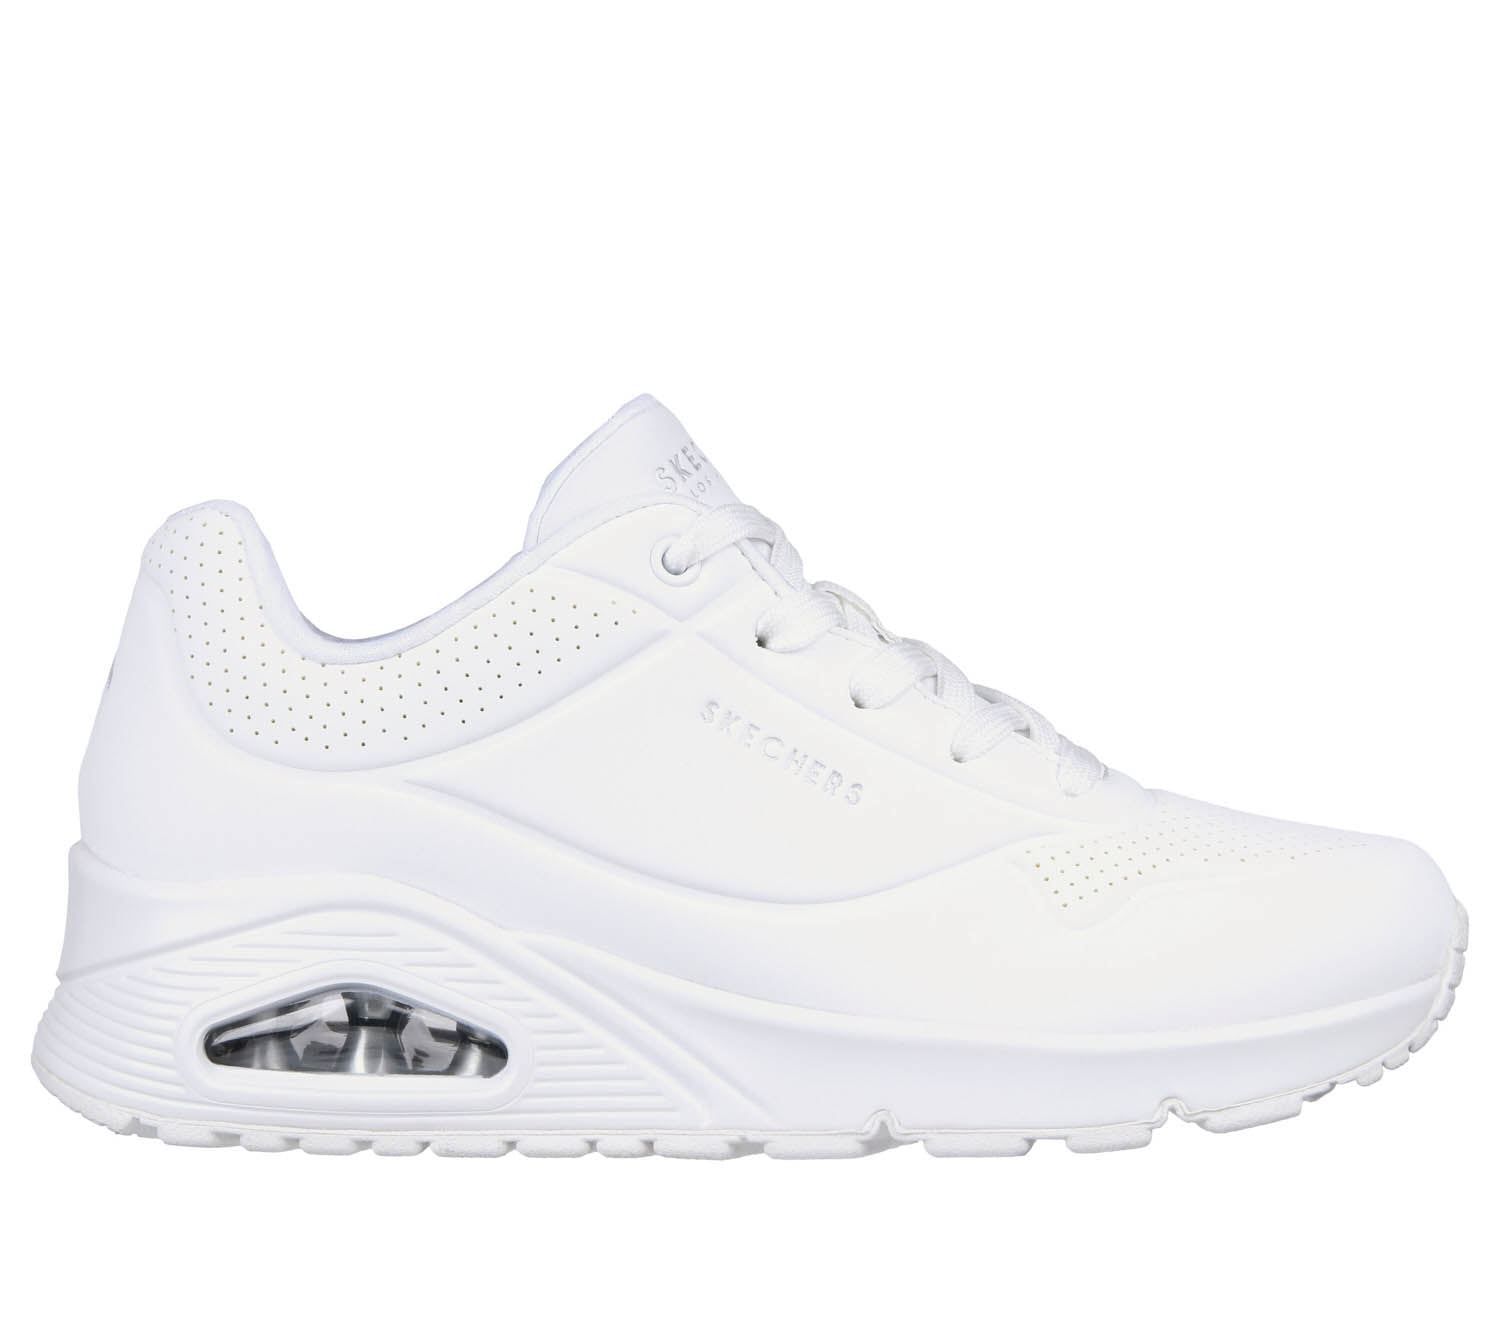 Skechers Uno Stand on Air